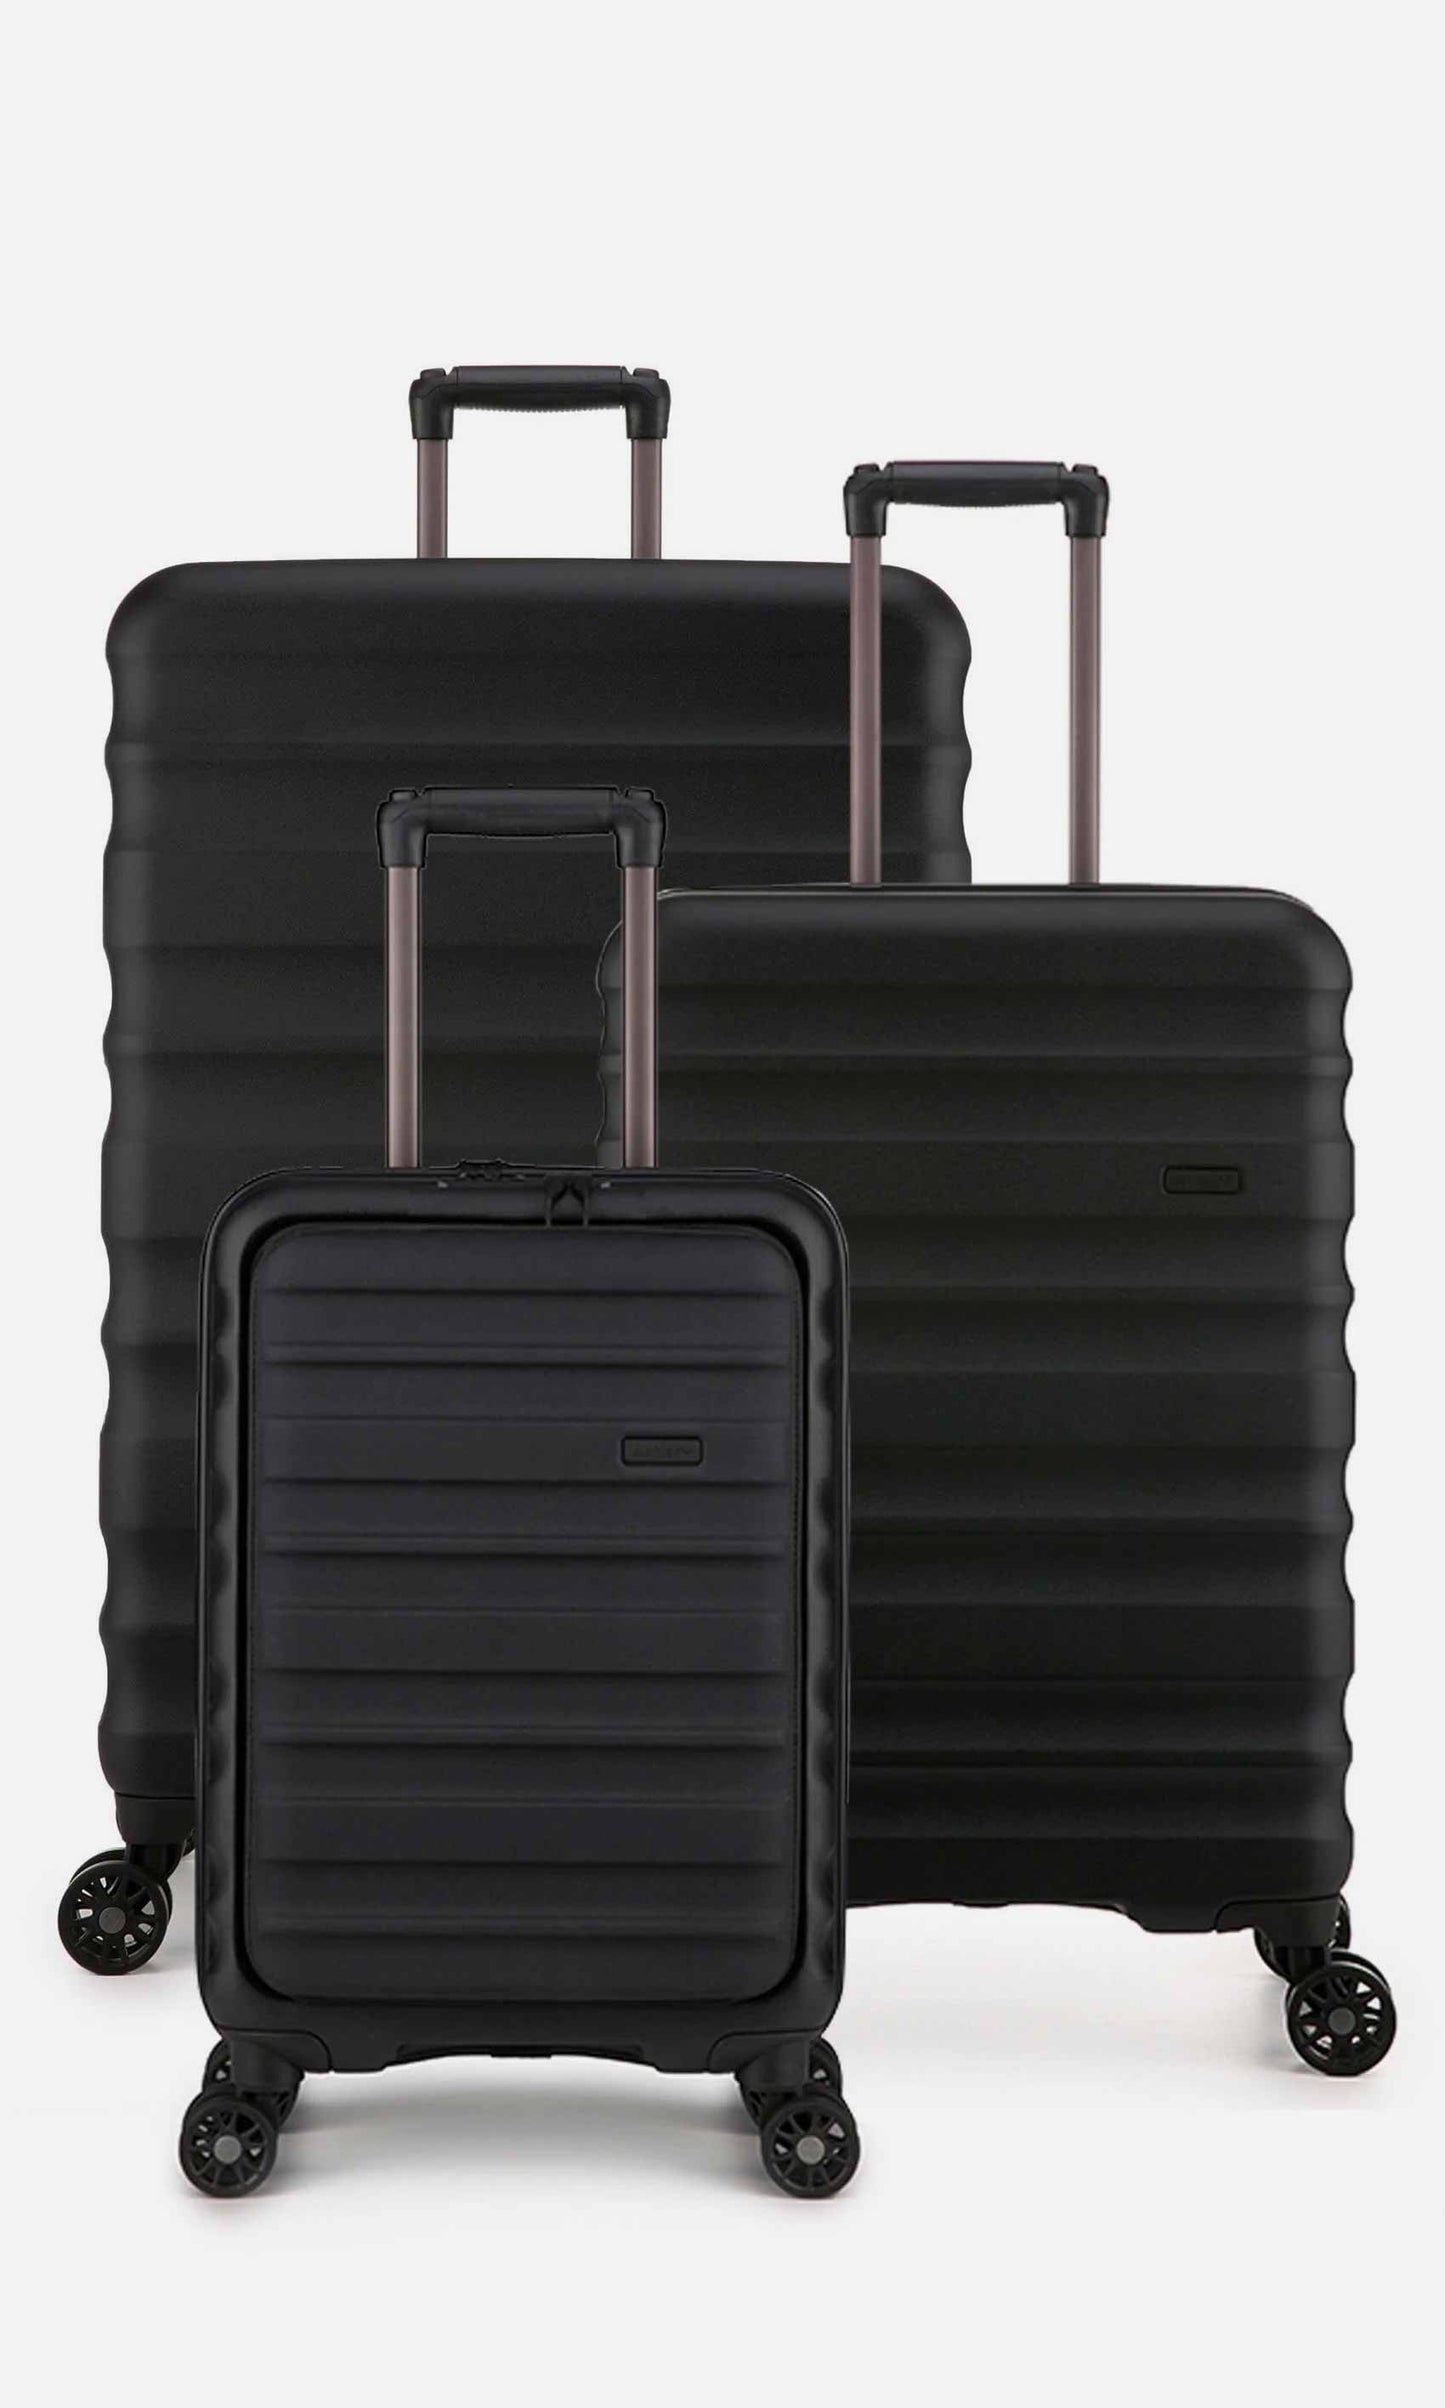 Antler Luggage -  Clifton cabin with pocket set in black - Hard Suitcases Clifton Cabin with Pocket | Set of 3 Suitcases Black | Antler UK